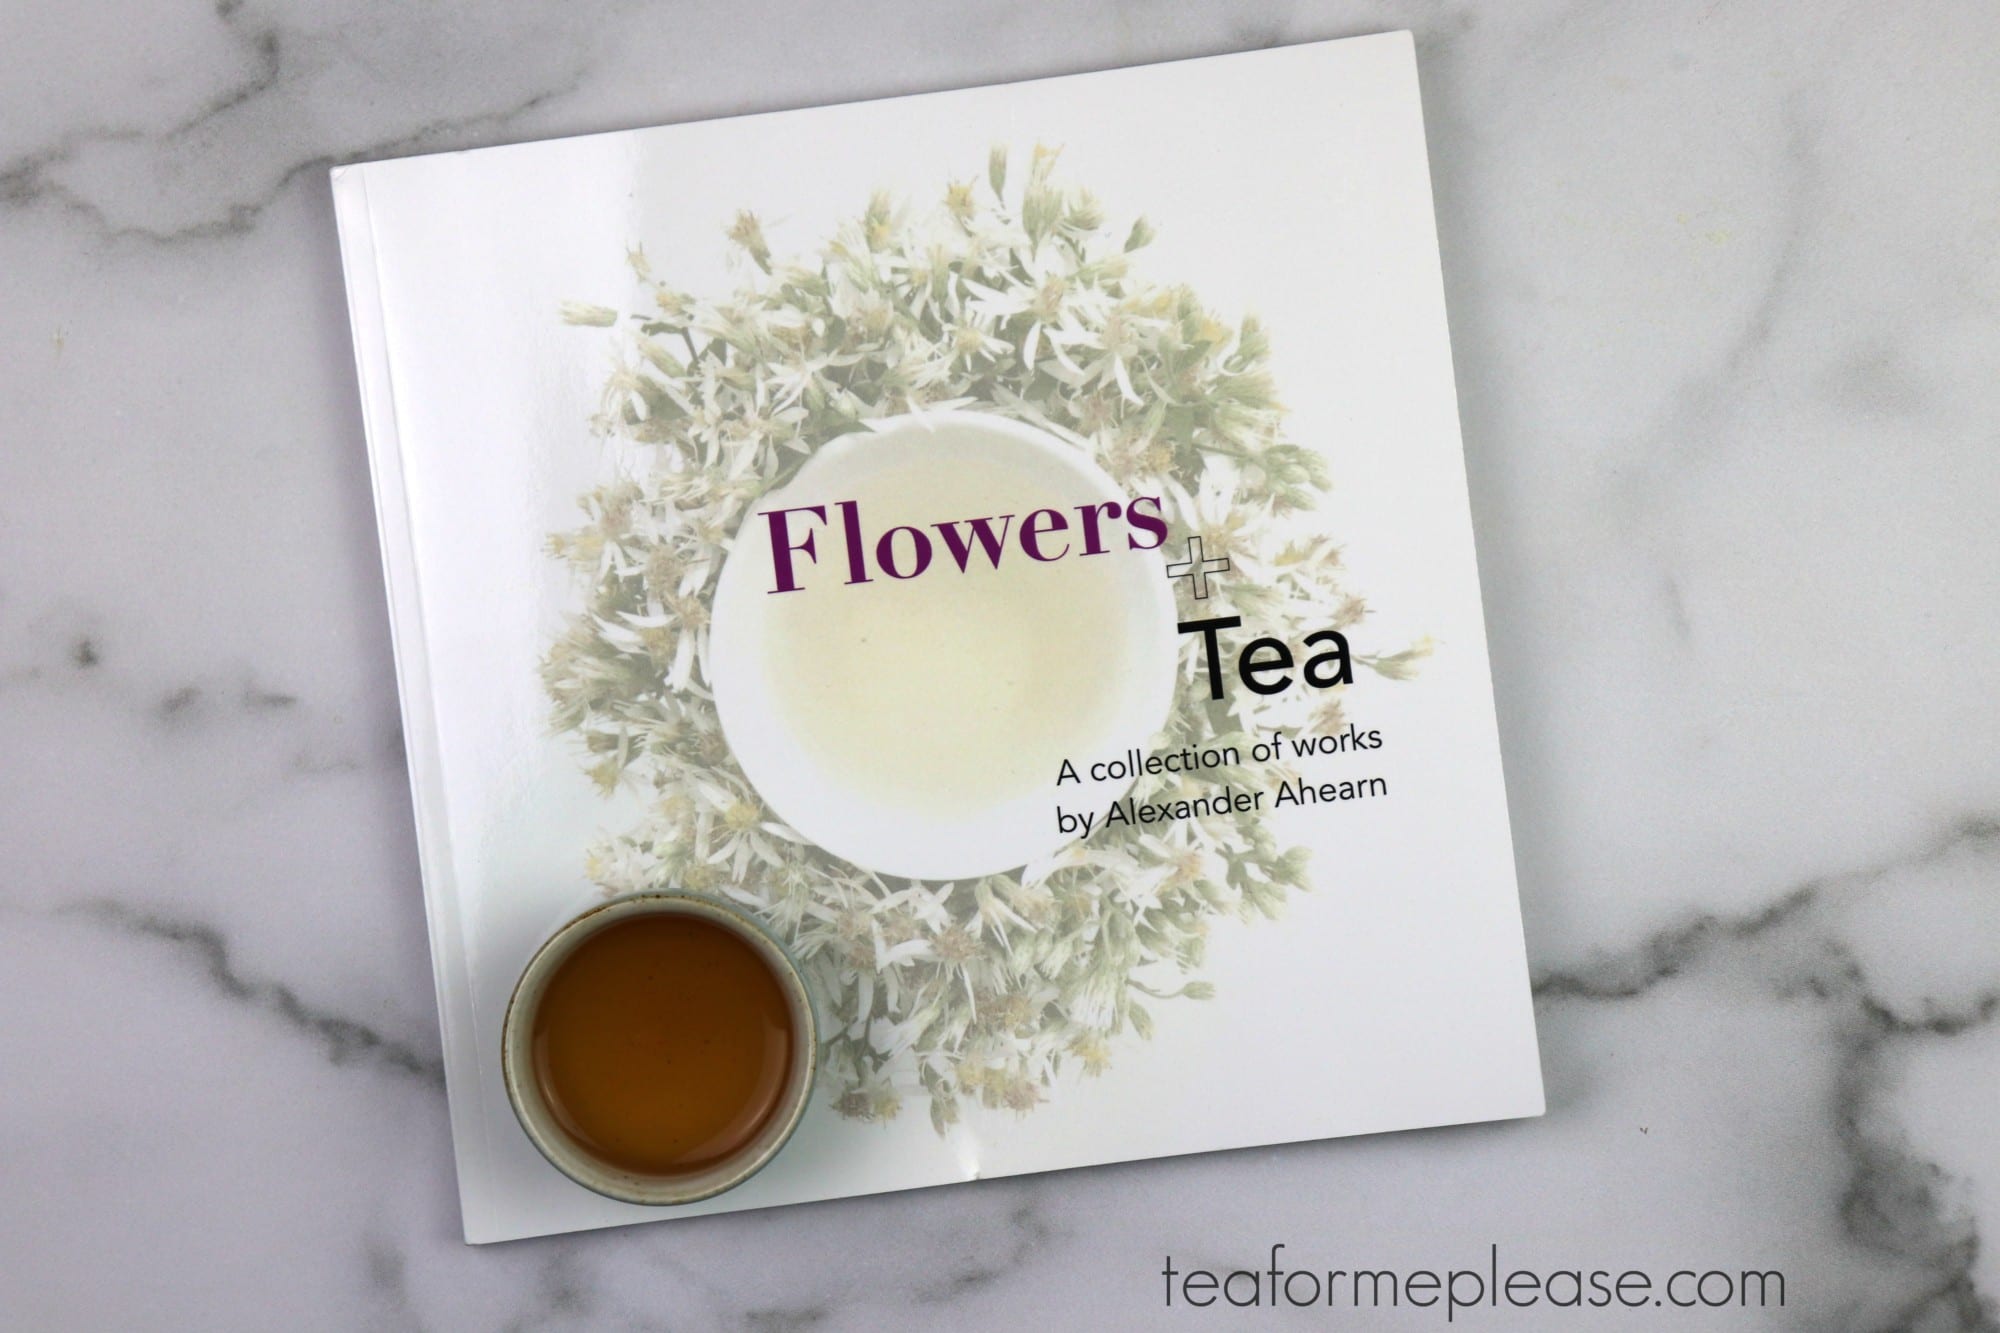 Flowers + Tea: A collection of works by Alexander Ahearn